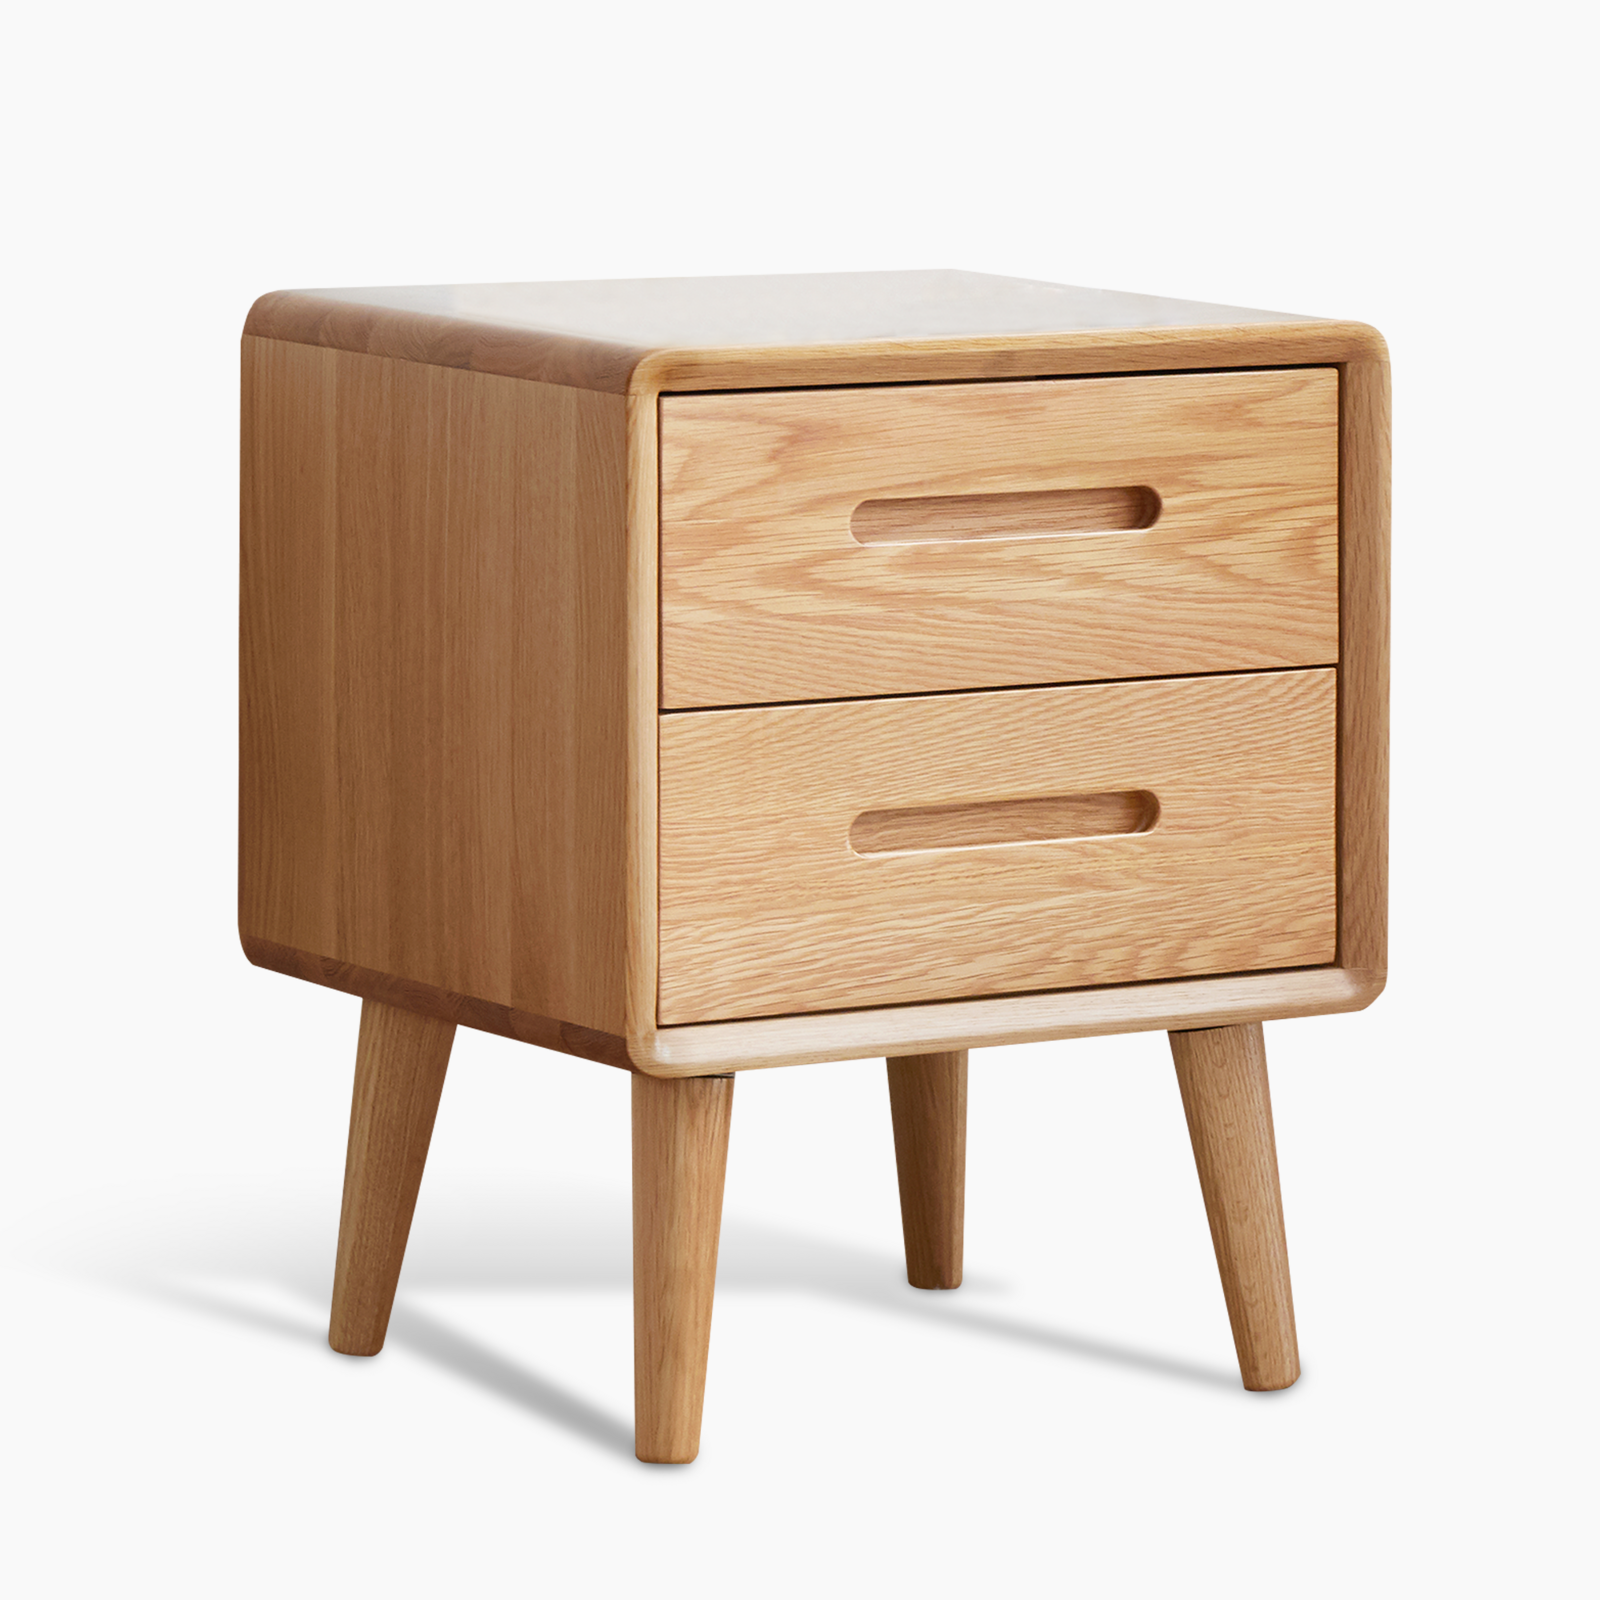 Bedside Table Bed Side Tables Drawers Side Tables Solid Timber American Oak Wood Nightstand